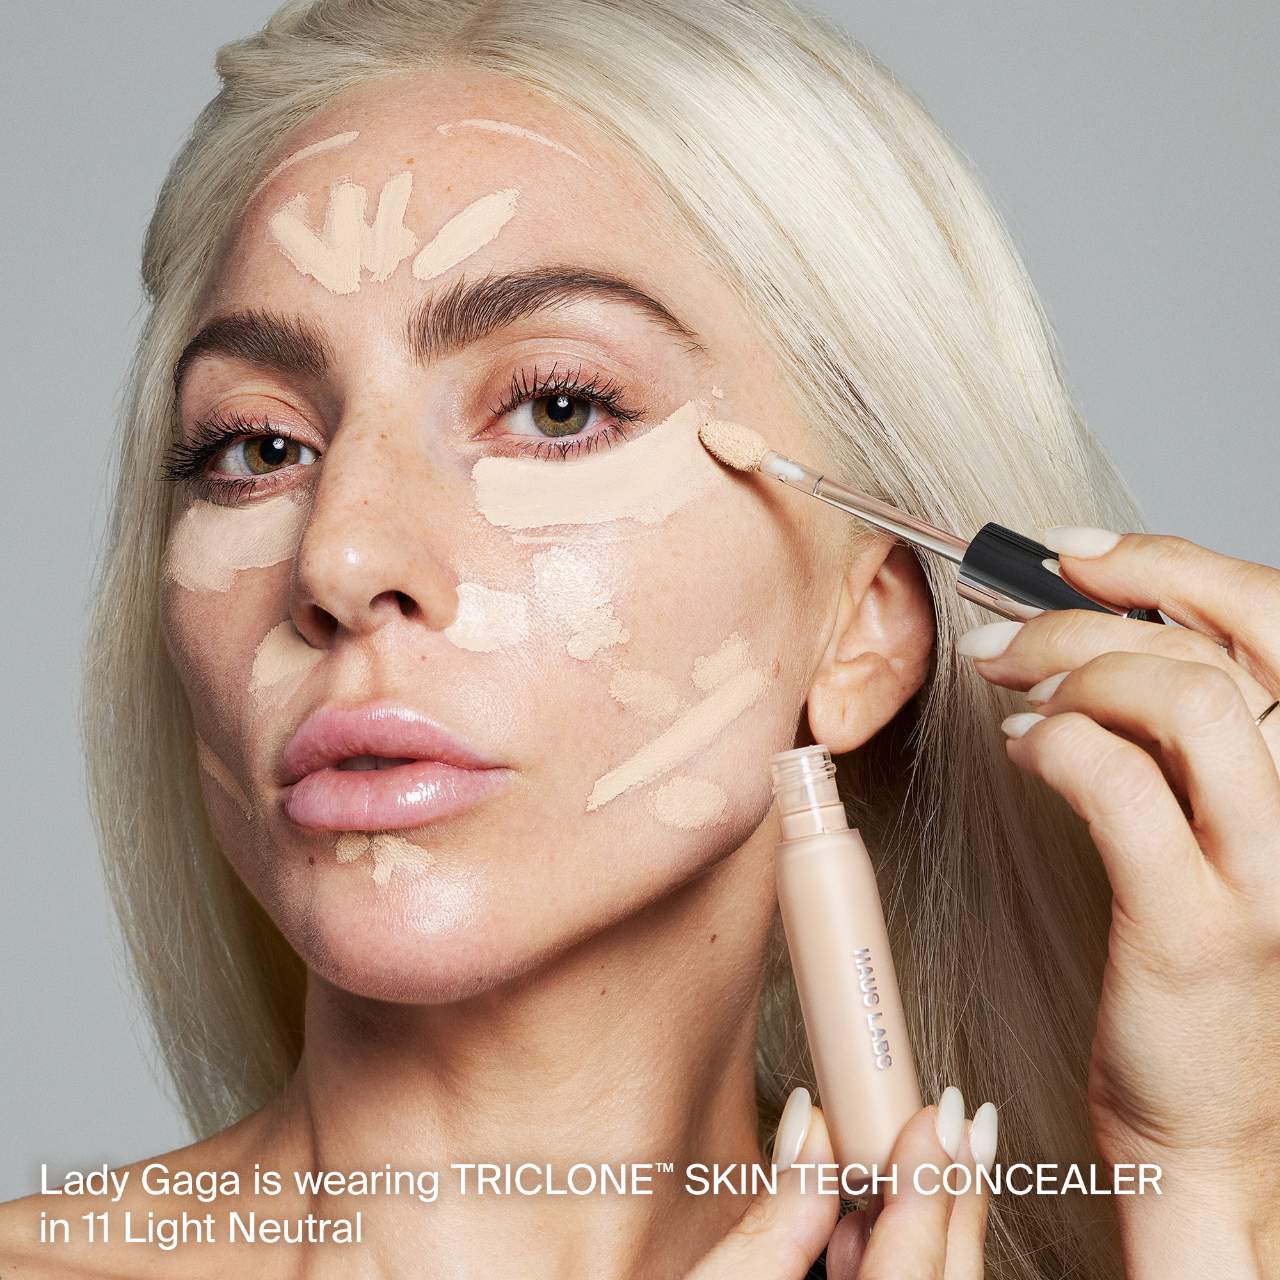 HAUS LABS BY LADY GAGA | Triclone Skin Tech Hydrating + De-puffing Concealer with Fermented Arnica | 31 Medium Neutral